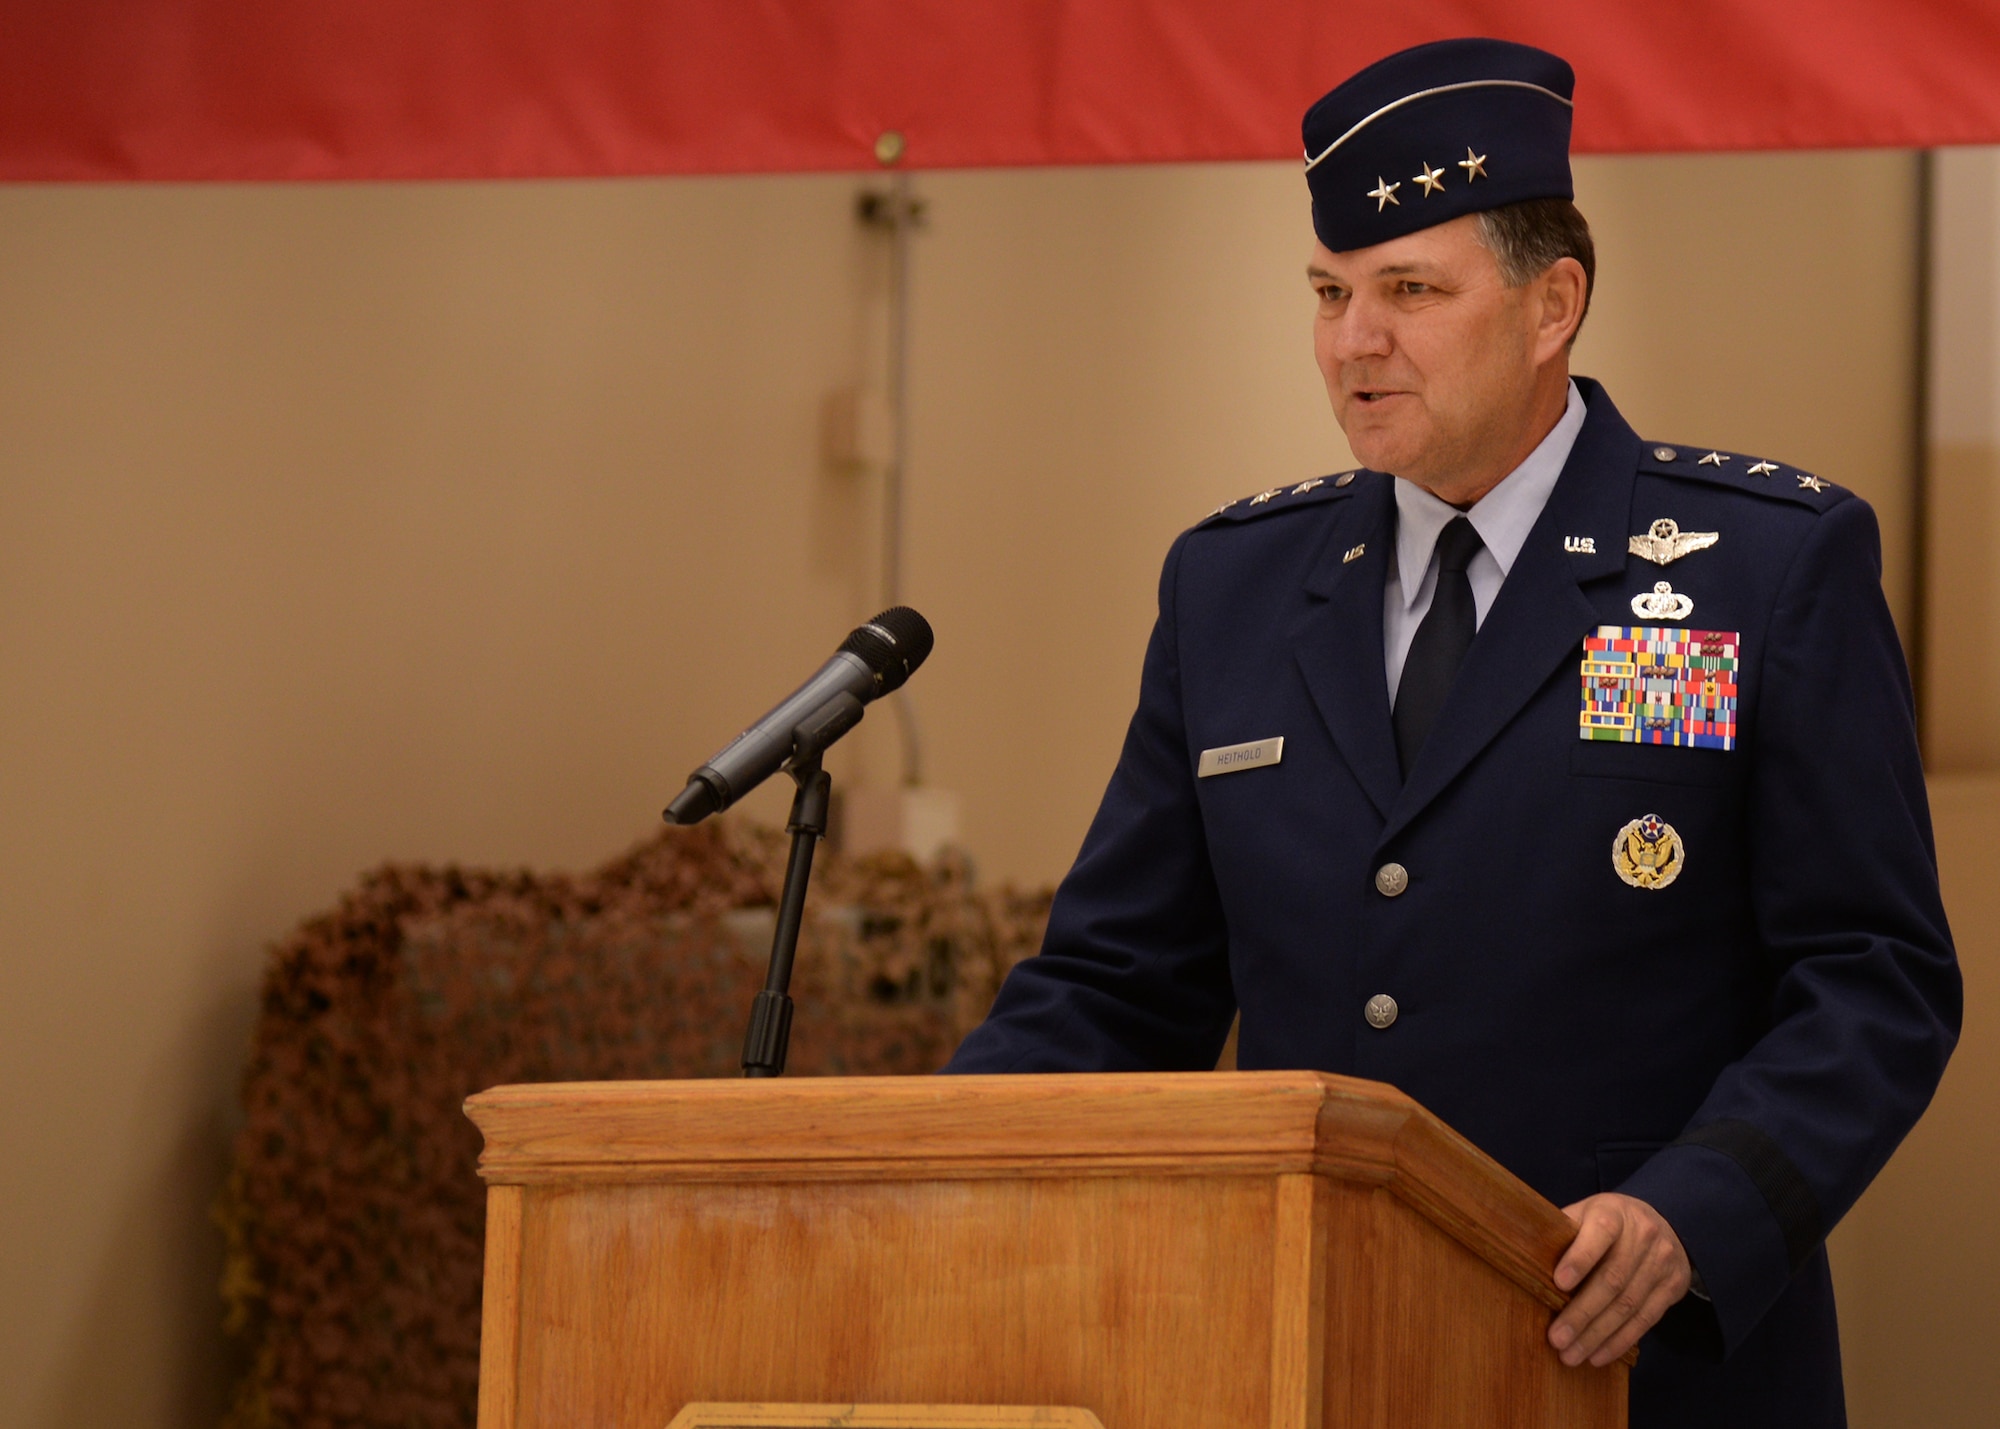 U.S. Air Force Lt. Gen. Bradley Heithold, Commander Air Force Special Operations Command, addresses Air Commandos at the 27th Special Operations Wing change of command ceremony Feb. 17, 2015 at Cannon Air Force Base, N.M. Heithold spoke with enthusiasm of both Col. Tony Bauernfeind, outgoing 27th SOW commander, and Col. Benjamin Maitre, incoming 27th SOW commander, along with the team of Airmen they lead. (U.S. Air Force photo/Airman 1st Class Chip Slack)